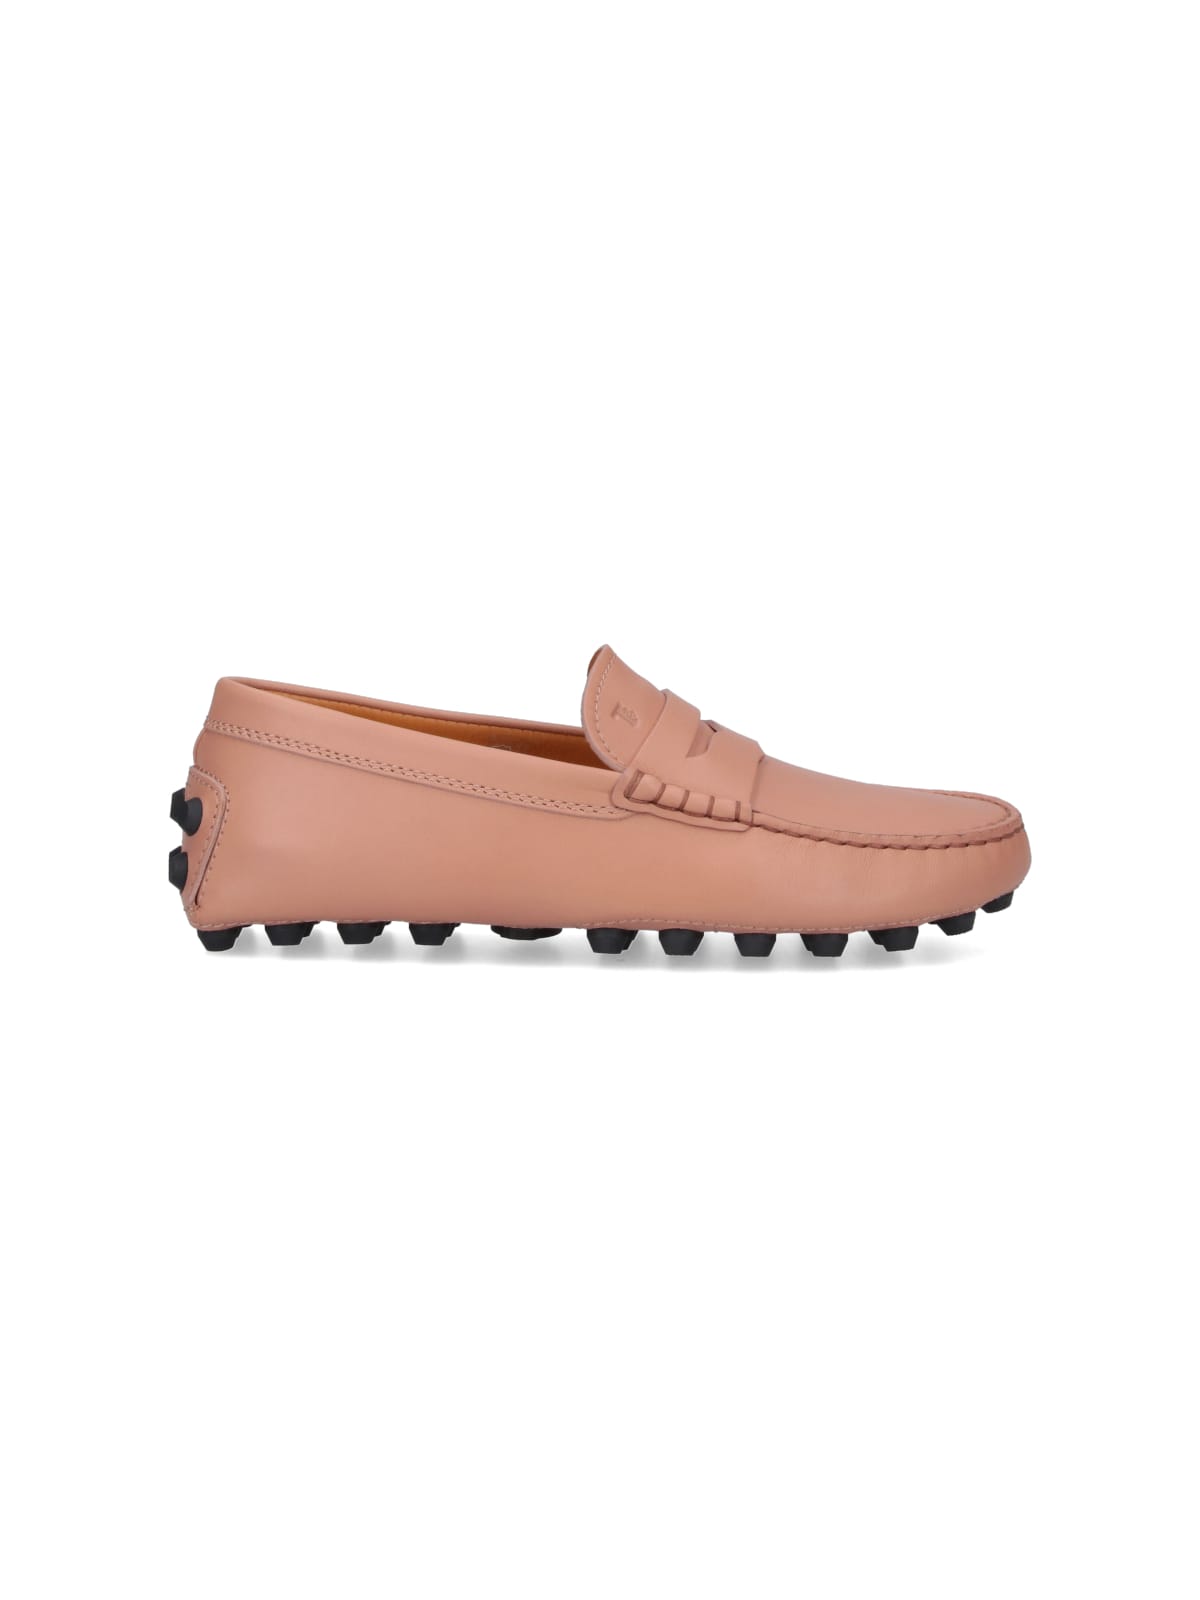 TOD'S BUBBLE LOAFERS